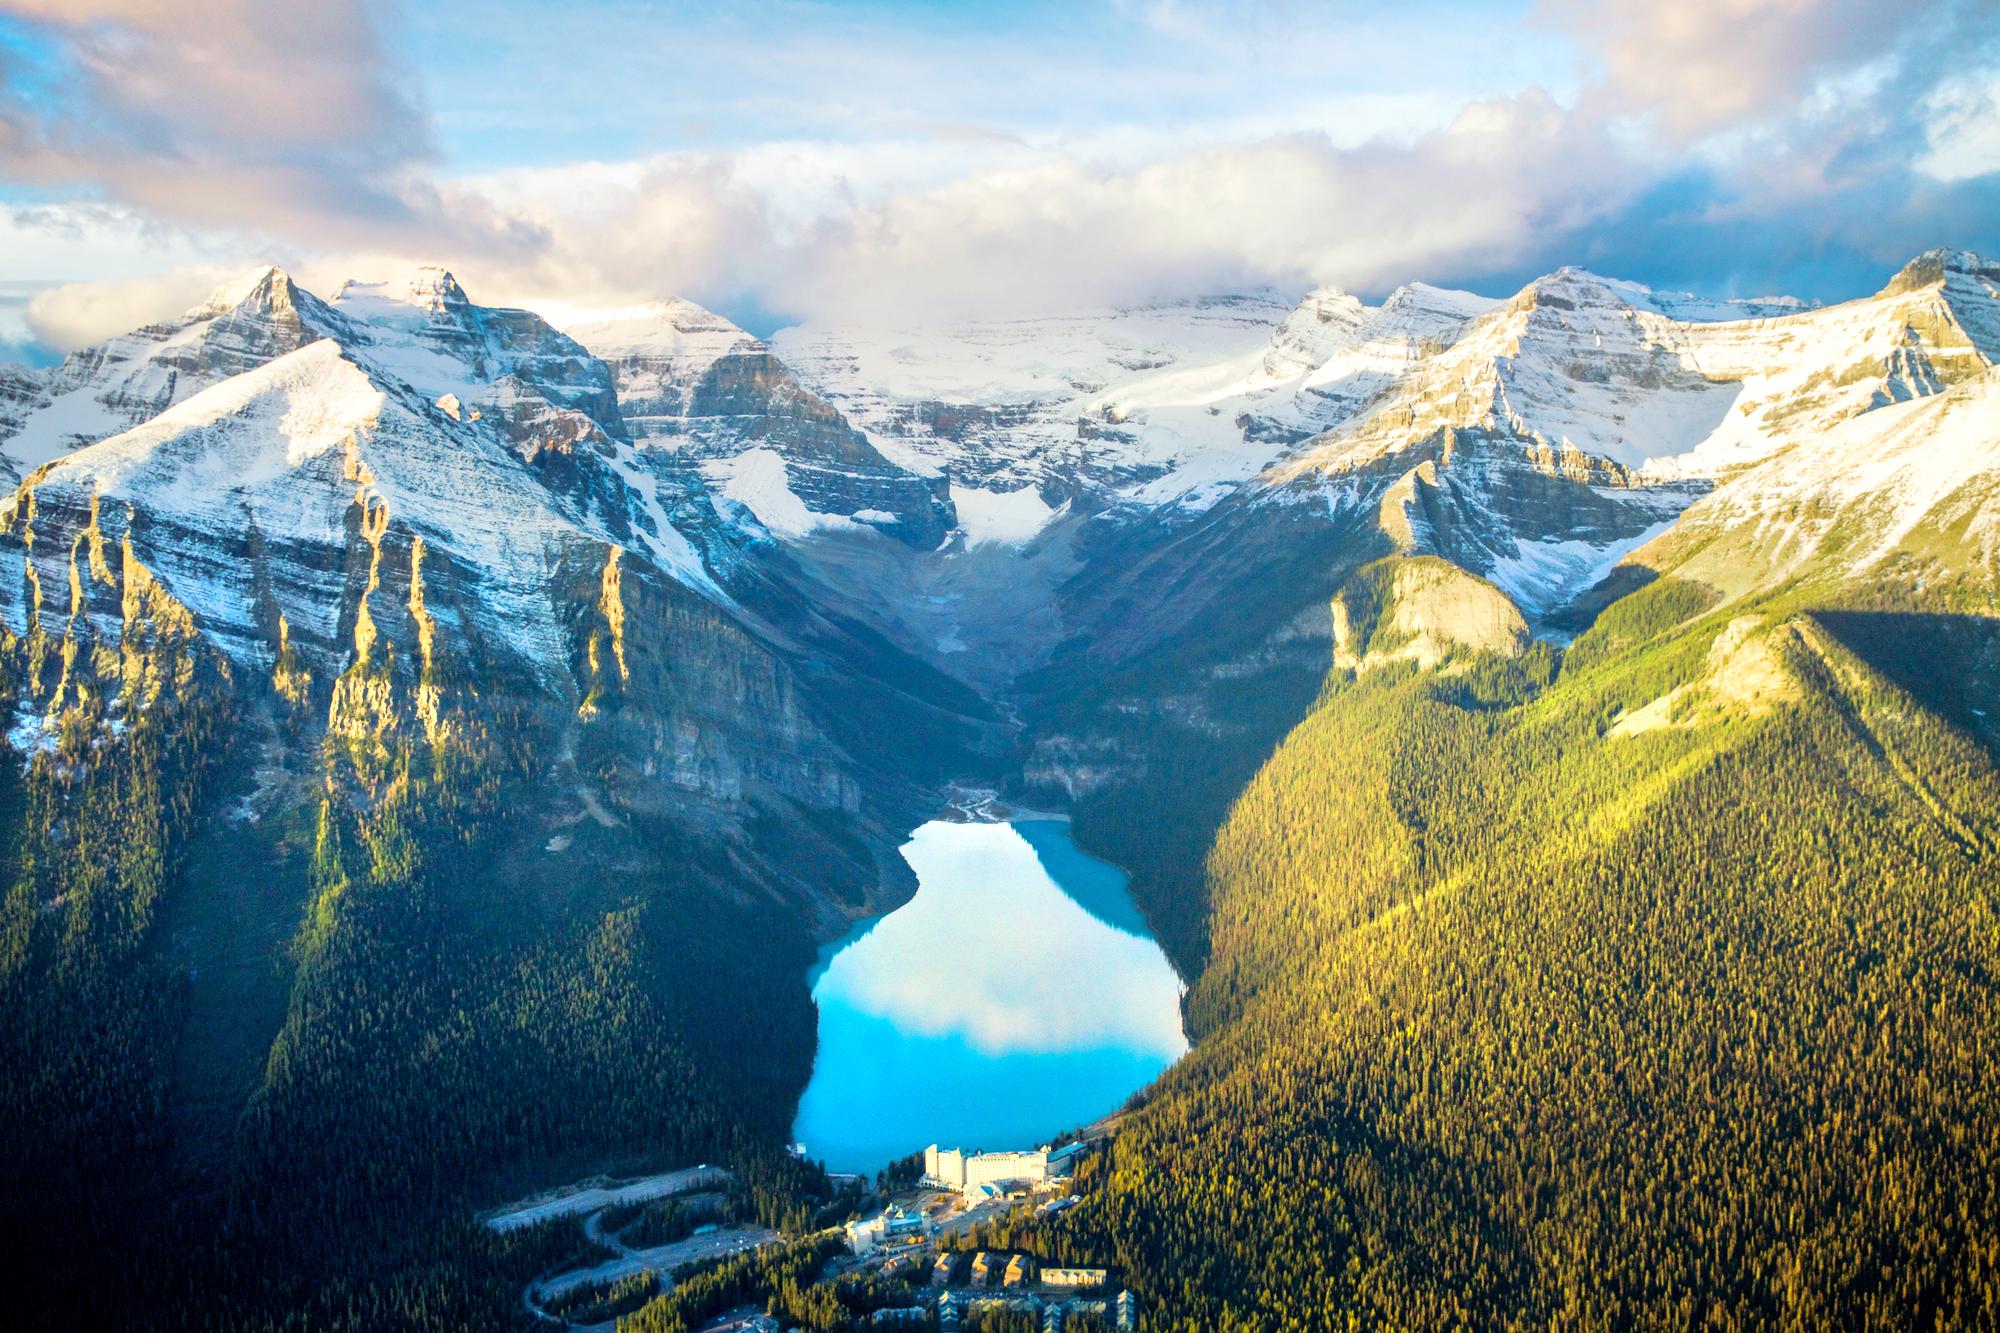 How to See the Best of Lake Louise in One Day - Casual Travelist